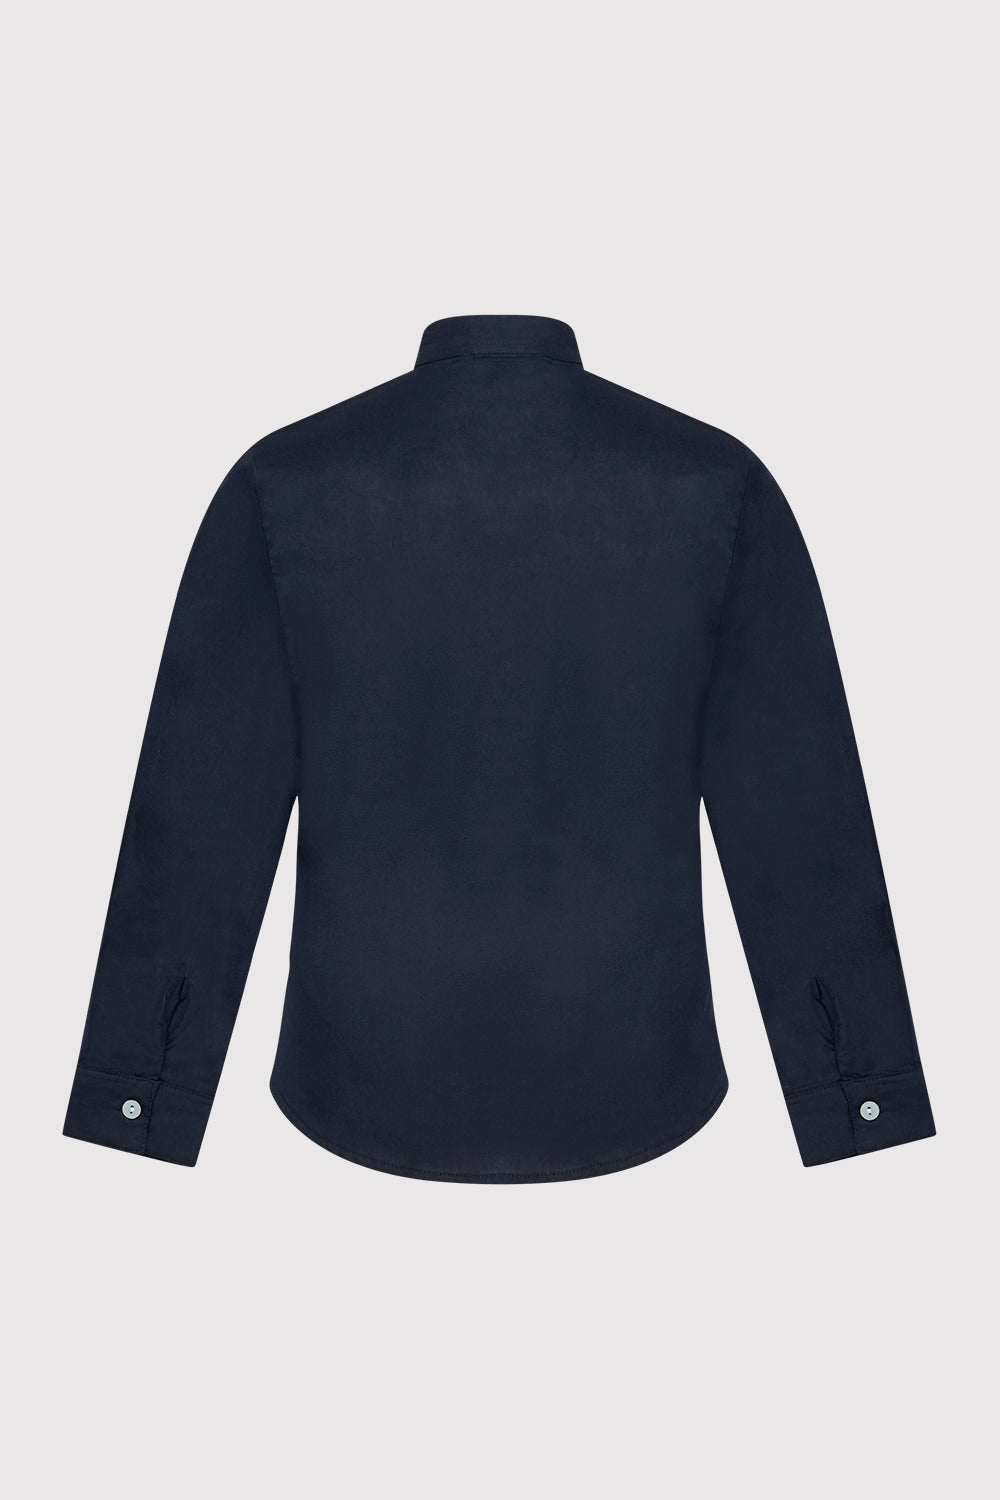 Long Sleeve Button-Up Boy's Shirt with Contrast Stitching in Navy Blue (2-12yrs)